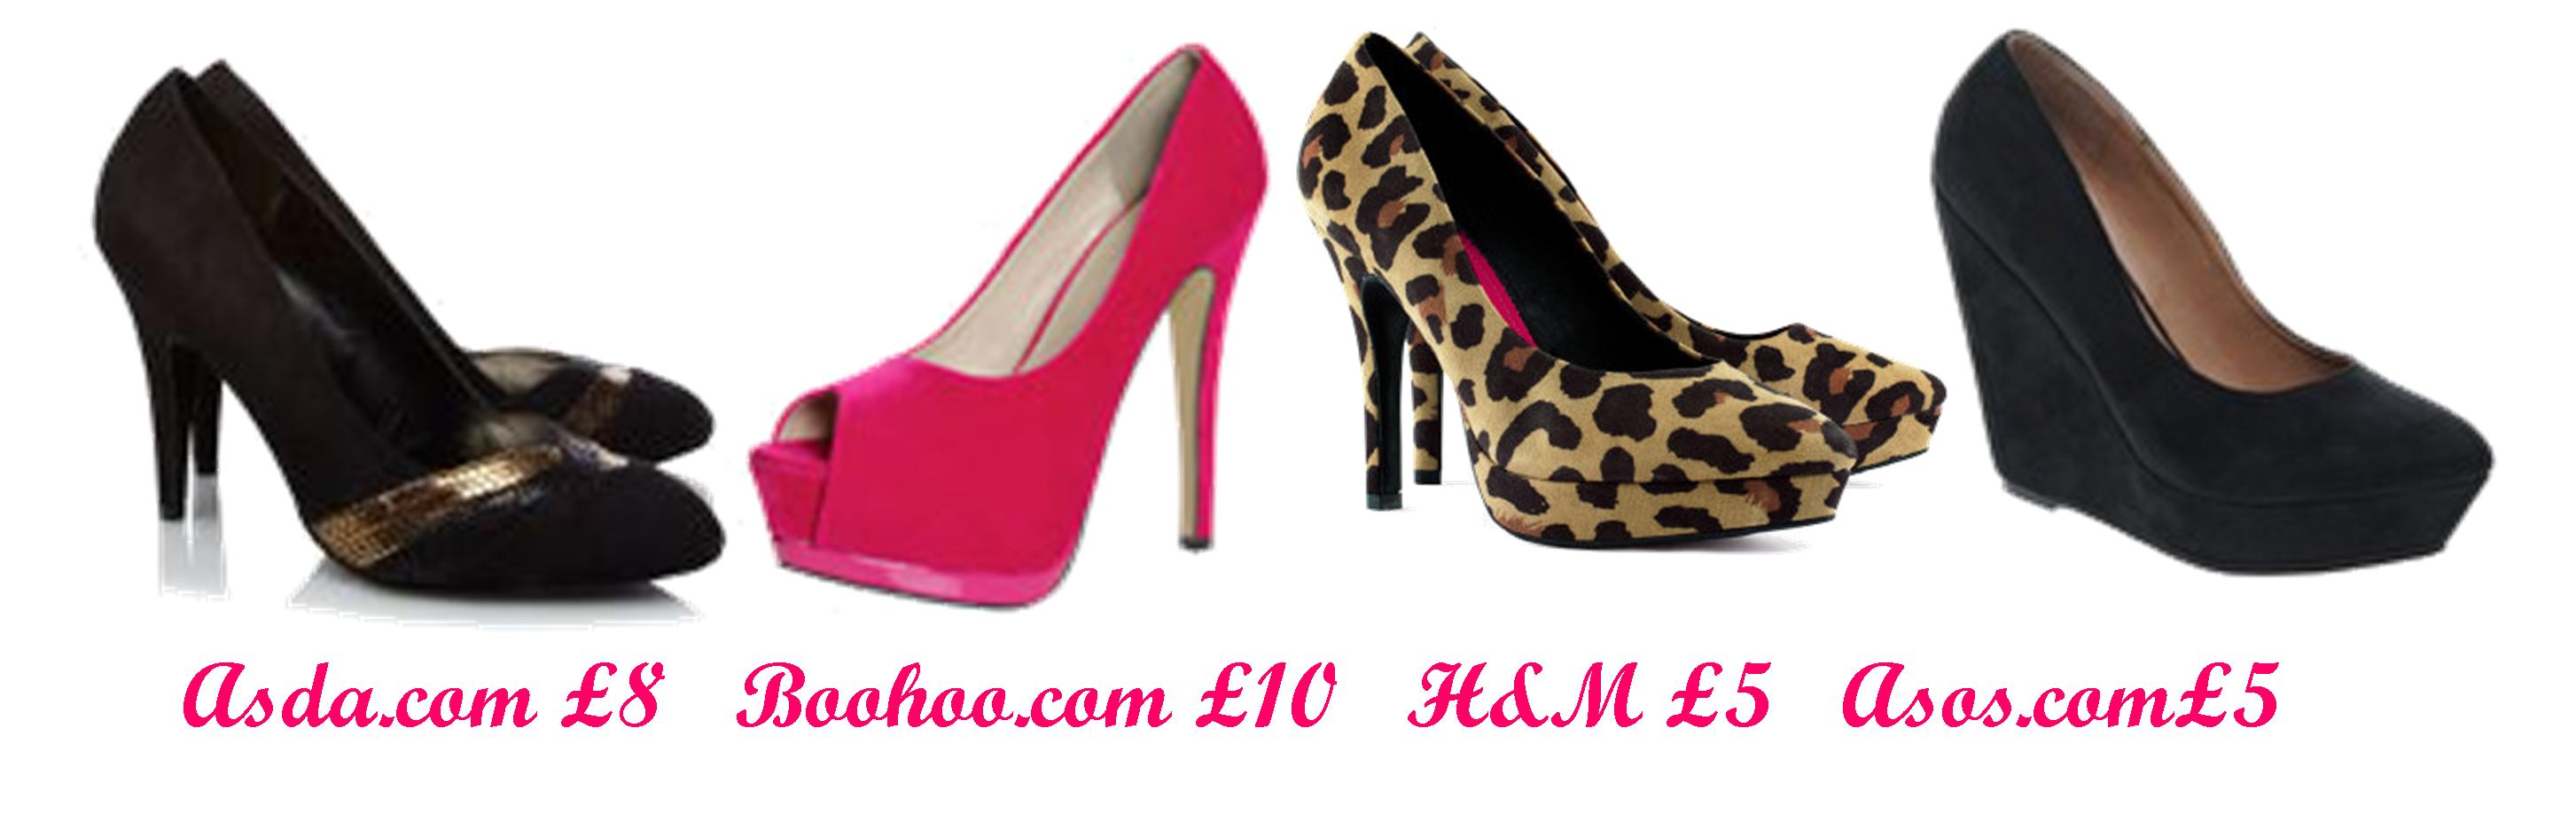 tuesday shoesday cheapest sale shoes jan 2013 asda asos boohoo h and m heels